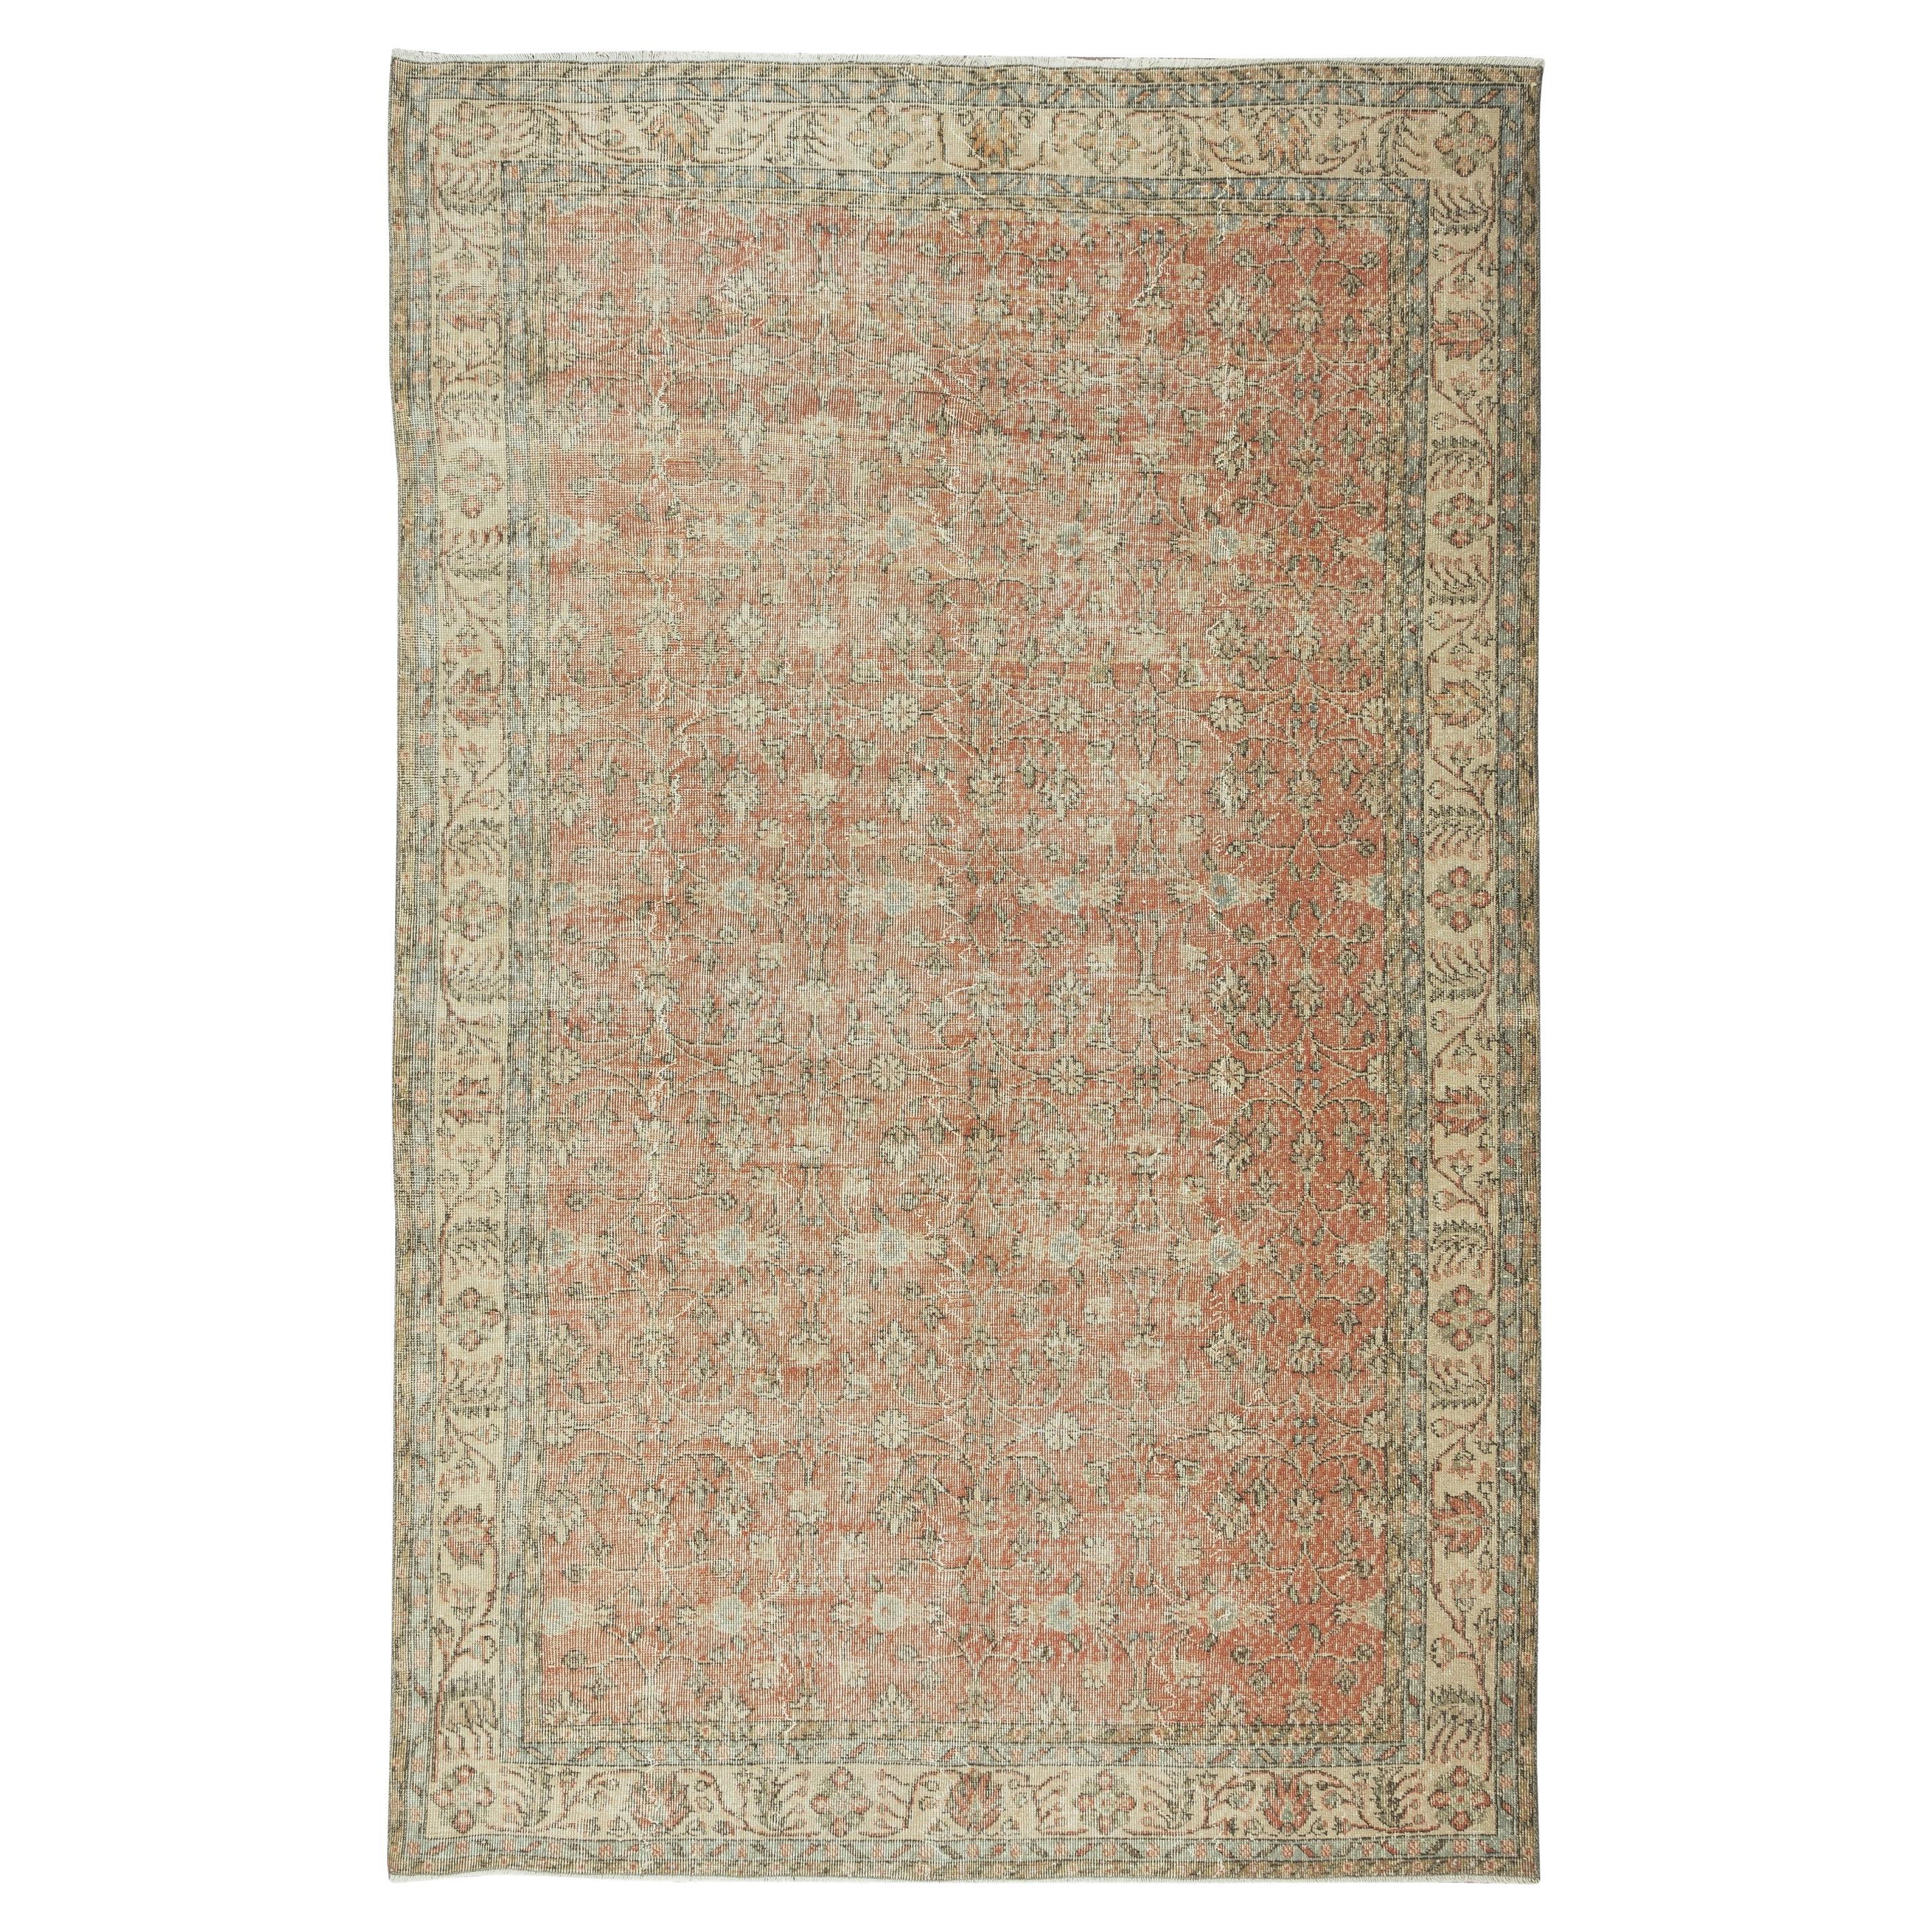 6.6x10.5 Ft Hand Knotted Floral Vintage Turkish Area Rug, Wool and Cotton Carpet